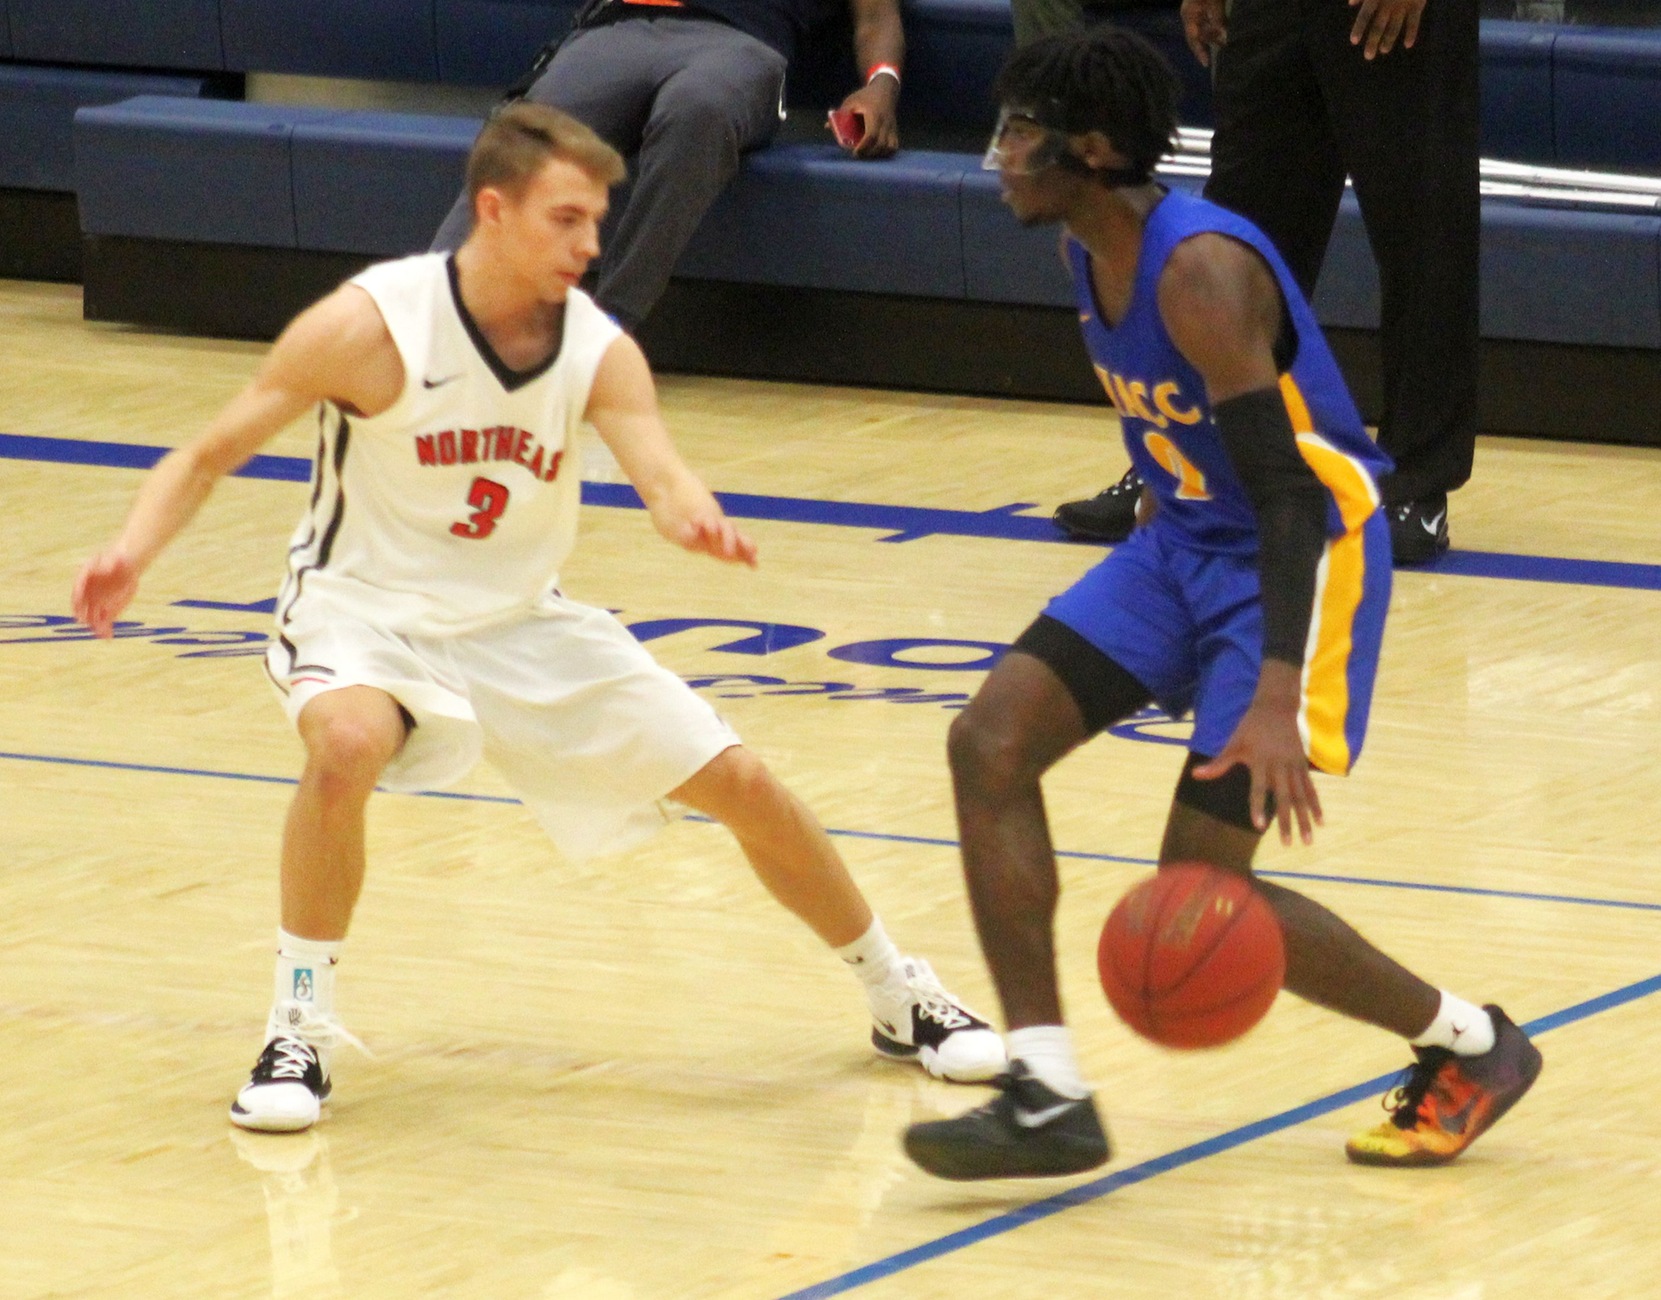 NIACC's James Harris moves the ball up the floor in Saturday's game against Northeast CC.